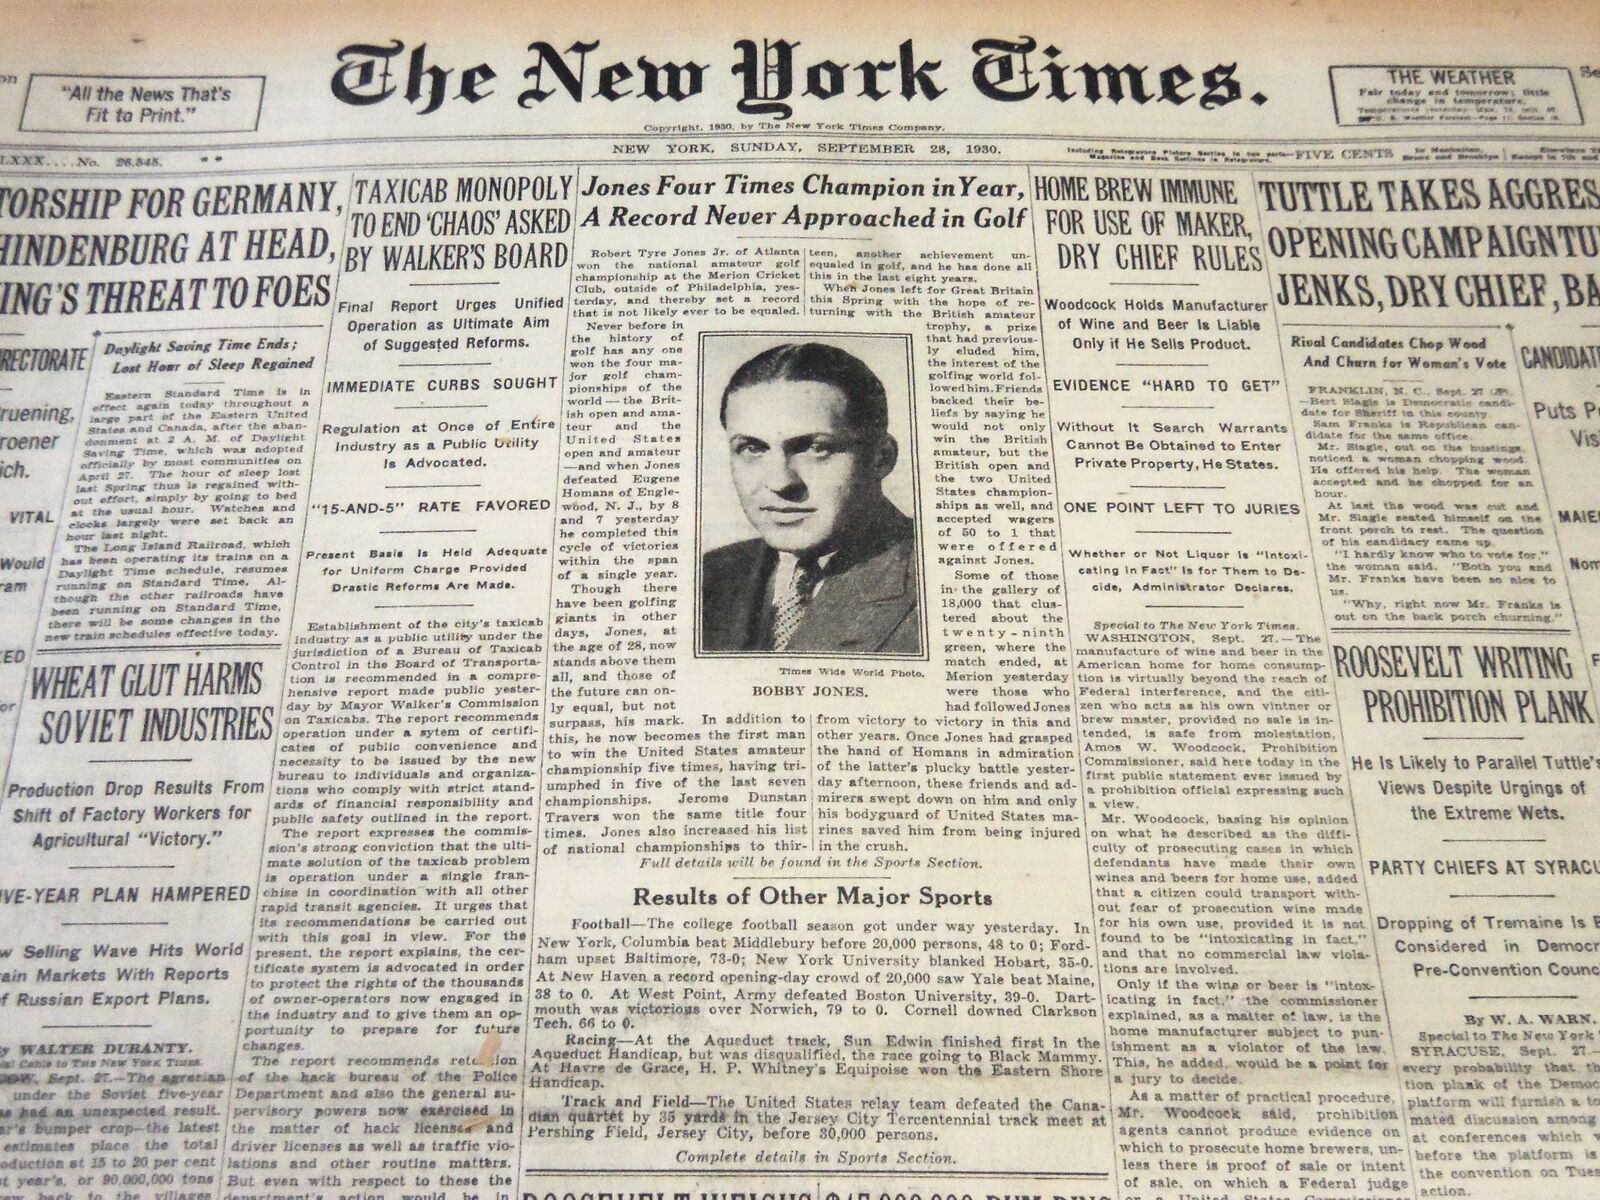 1930 SEPTEMBER 28 NEW YORK TIMES - JONES FOUR TIMES CHAMPION IN YEAR - NT 6186